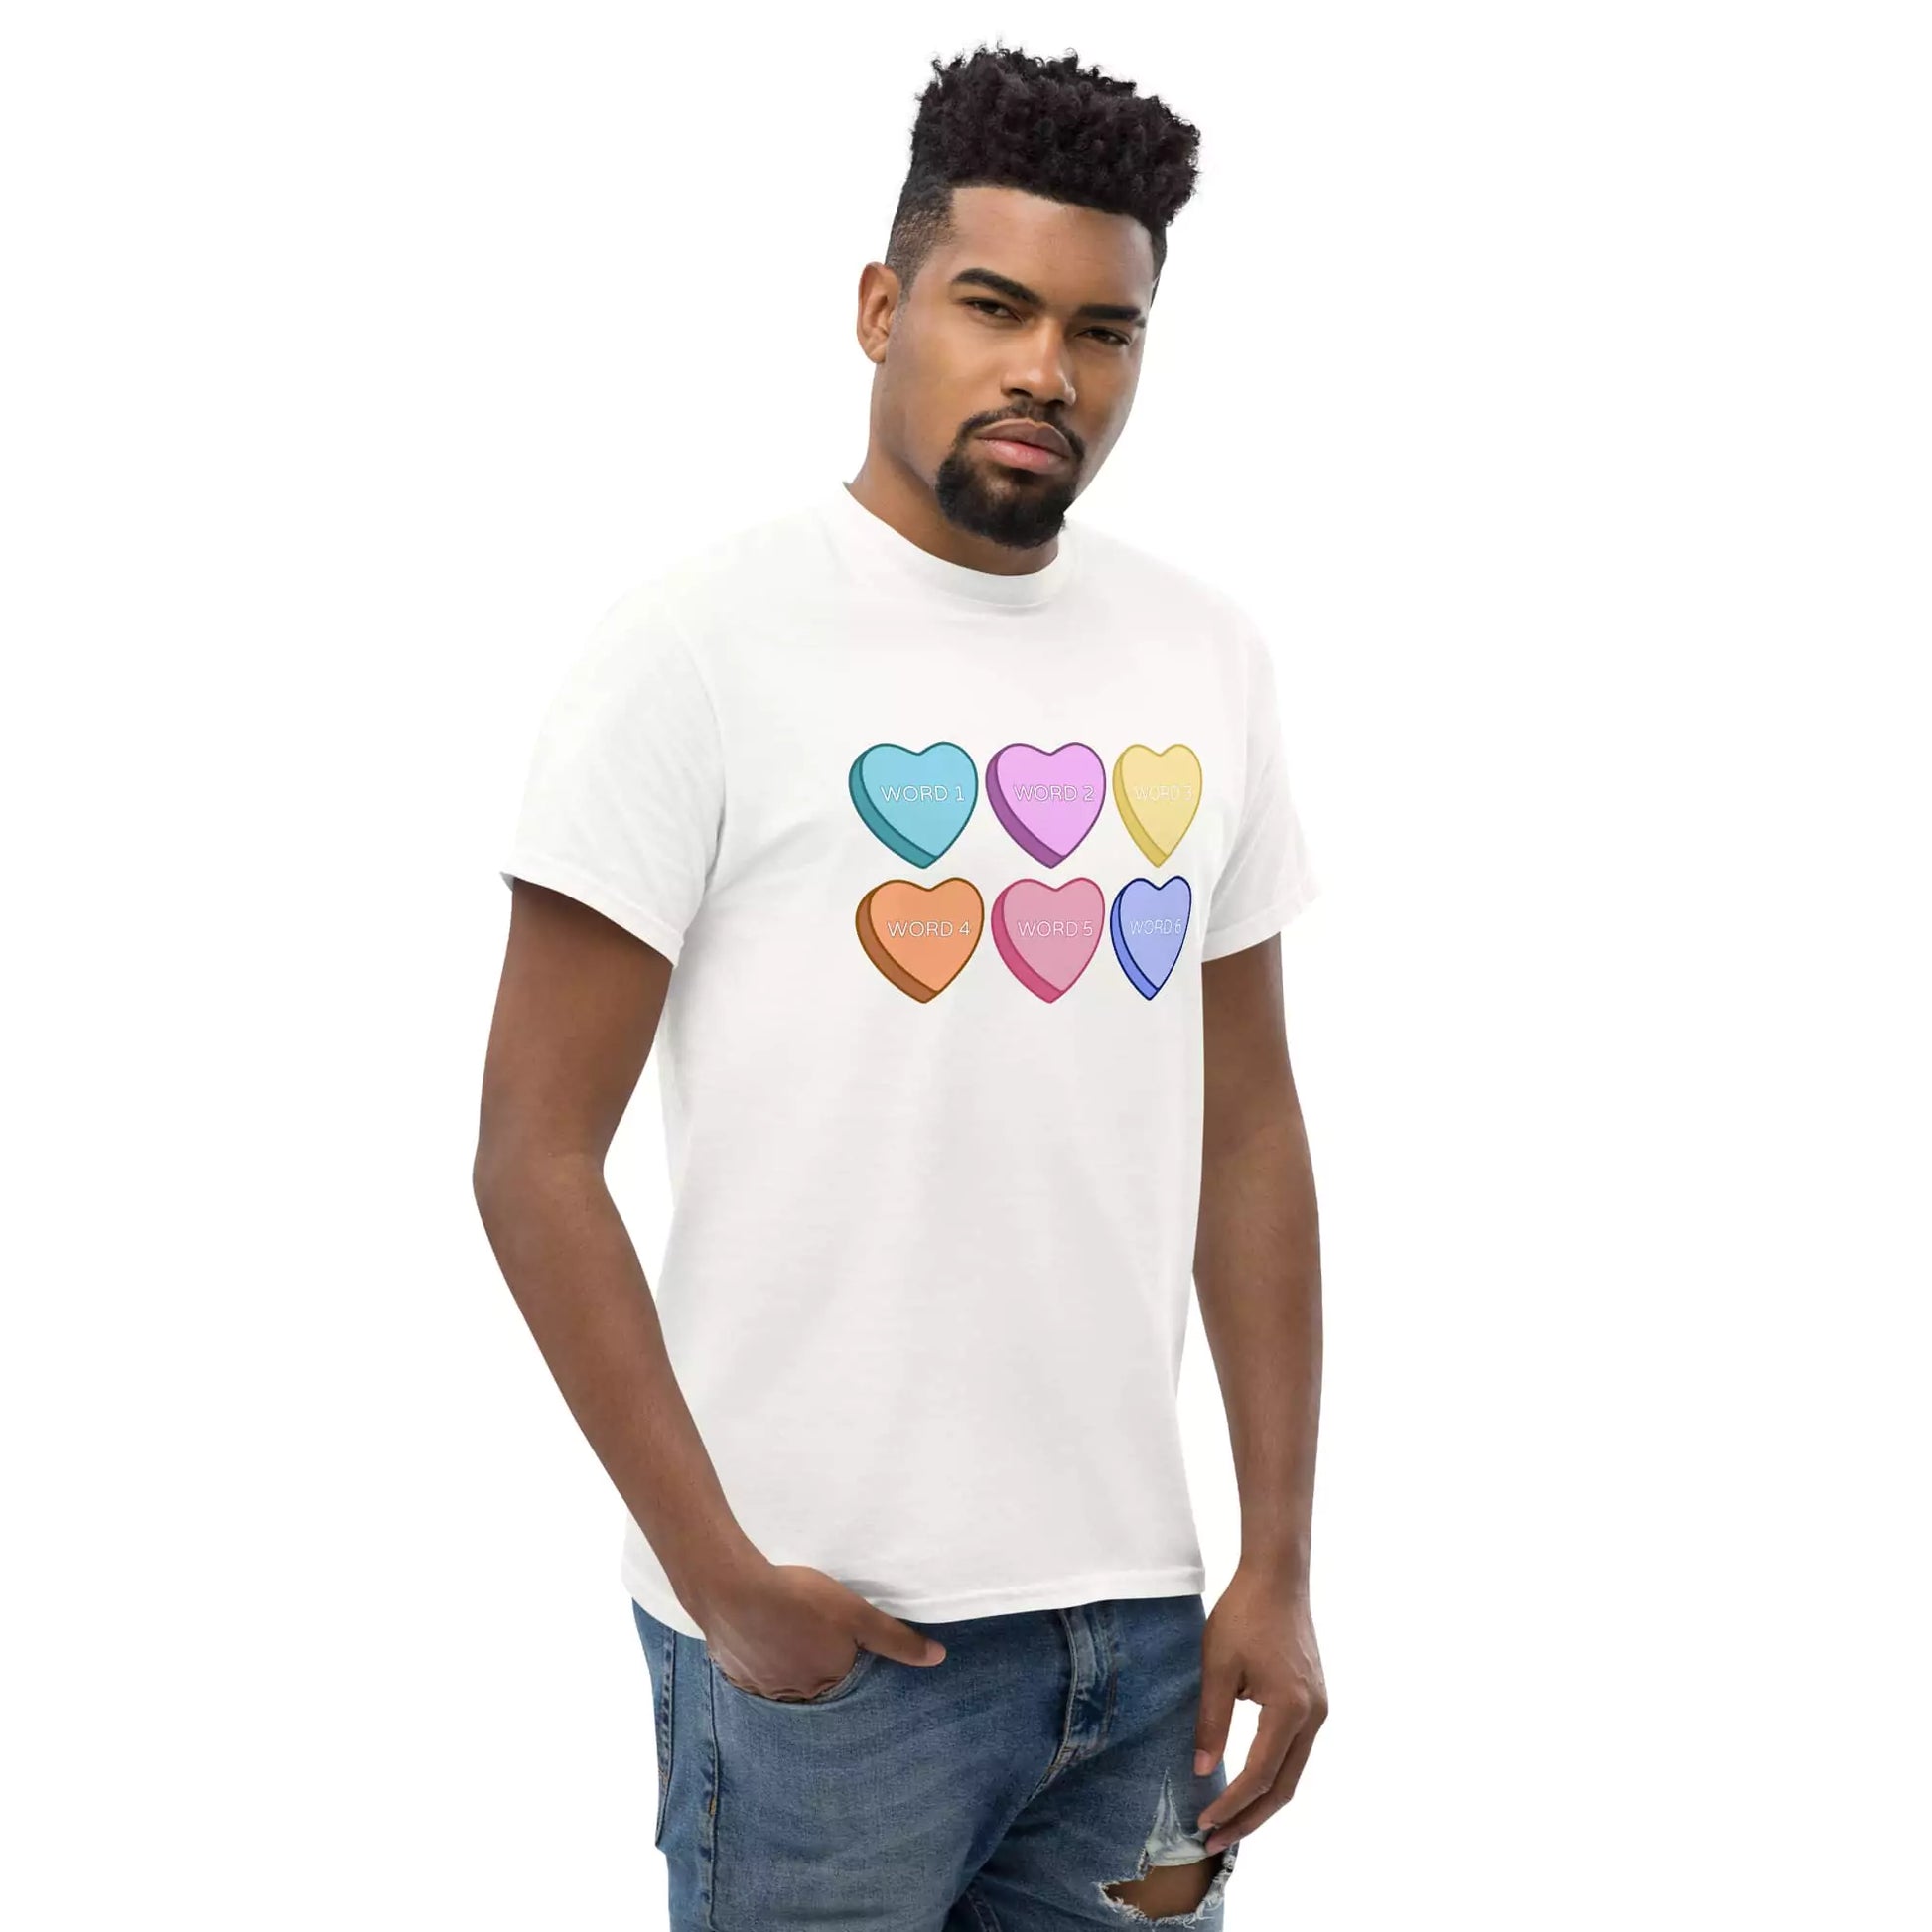 Shop Valentine's Conversation Candy Hearts T-Shirt Customizable for Valentine's Day by Boogs & Boop.